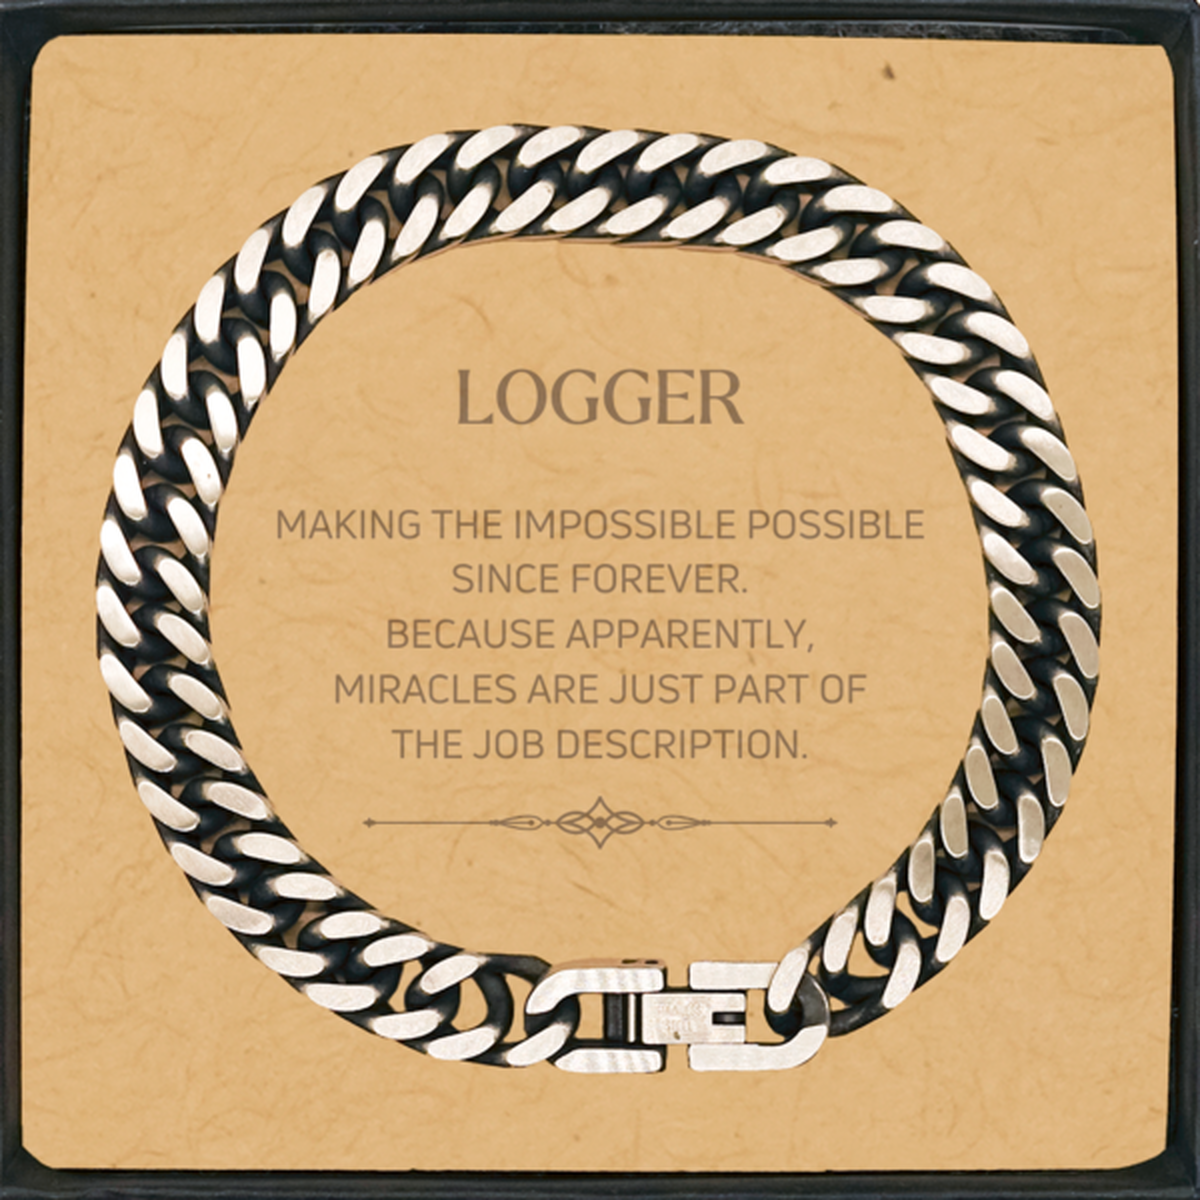 Funny Logger Gifts, Miracles are just part of the job description, Inspirational Birthday Cuban Link Chain Bracelet For Logger, Men, Women, Coworkers, Friends, Boss